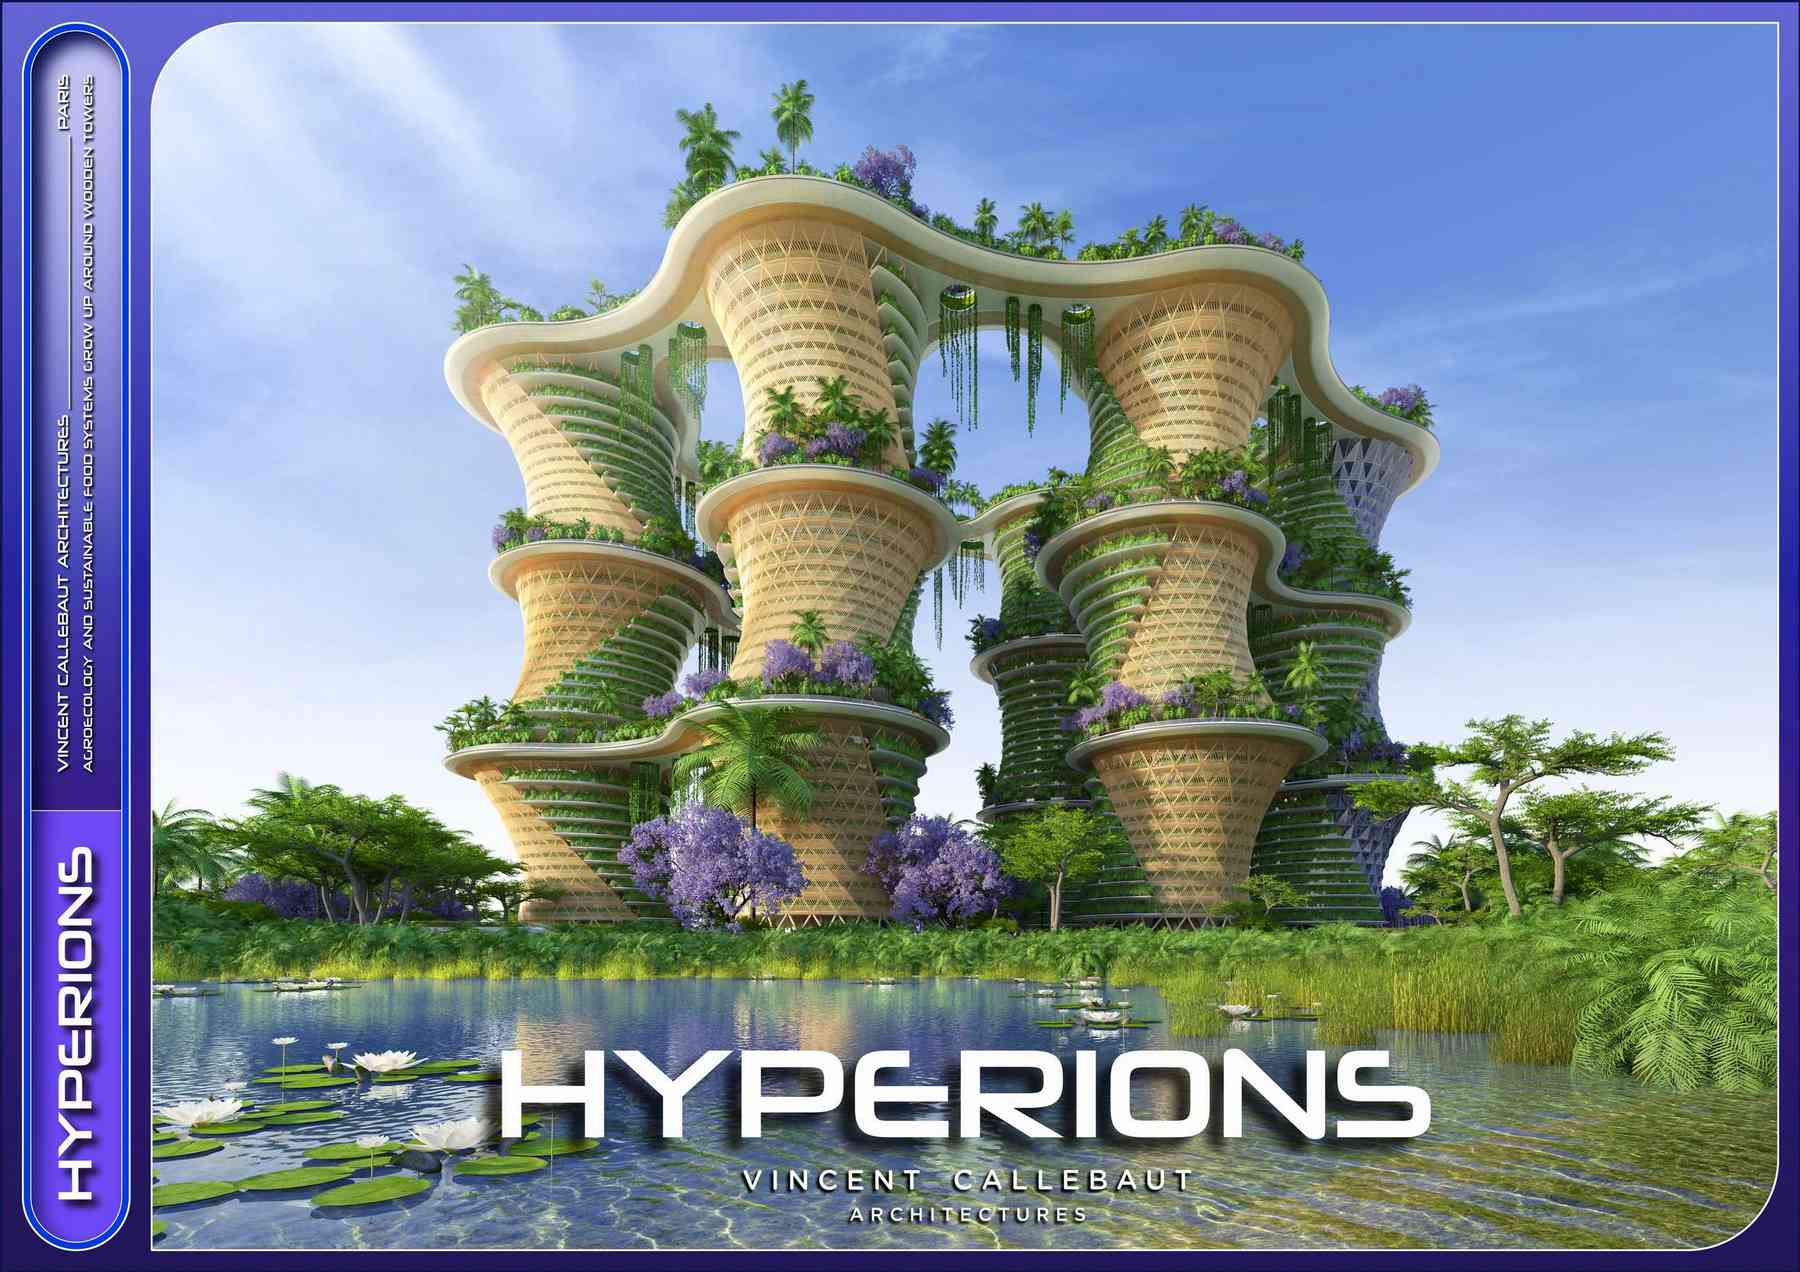 160220_hyperions-hyperions_pl001